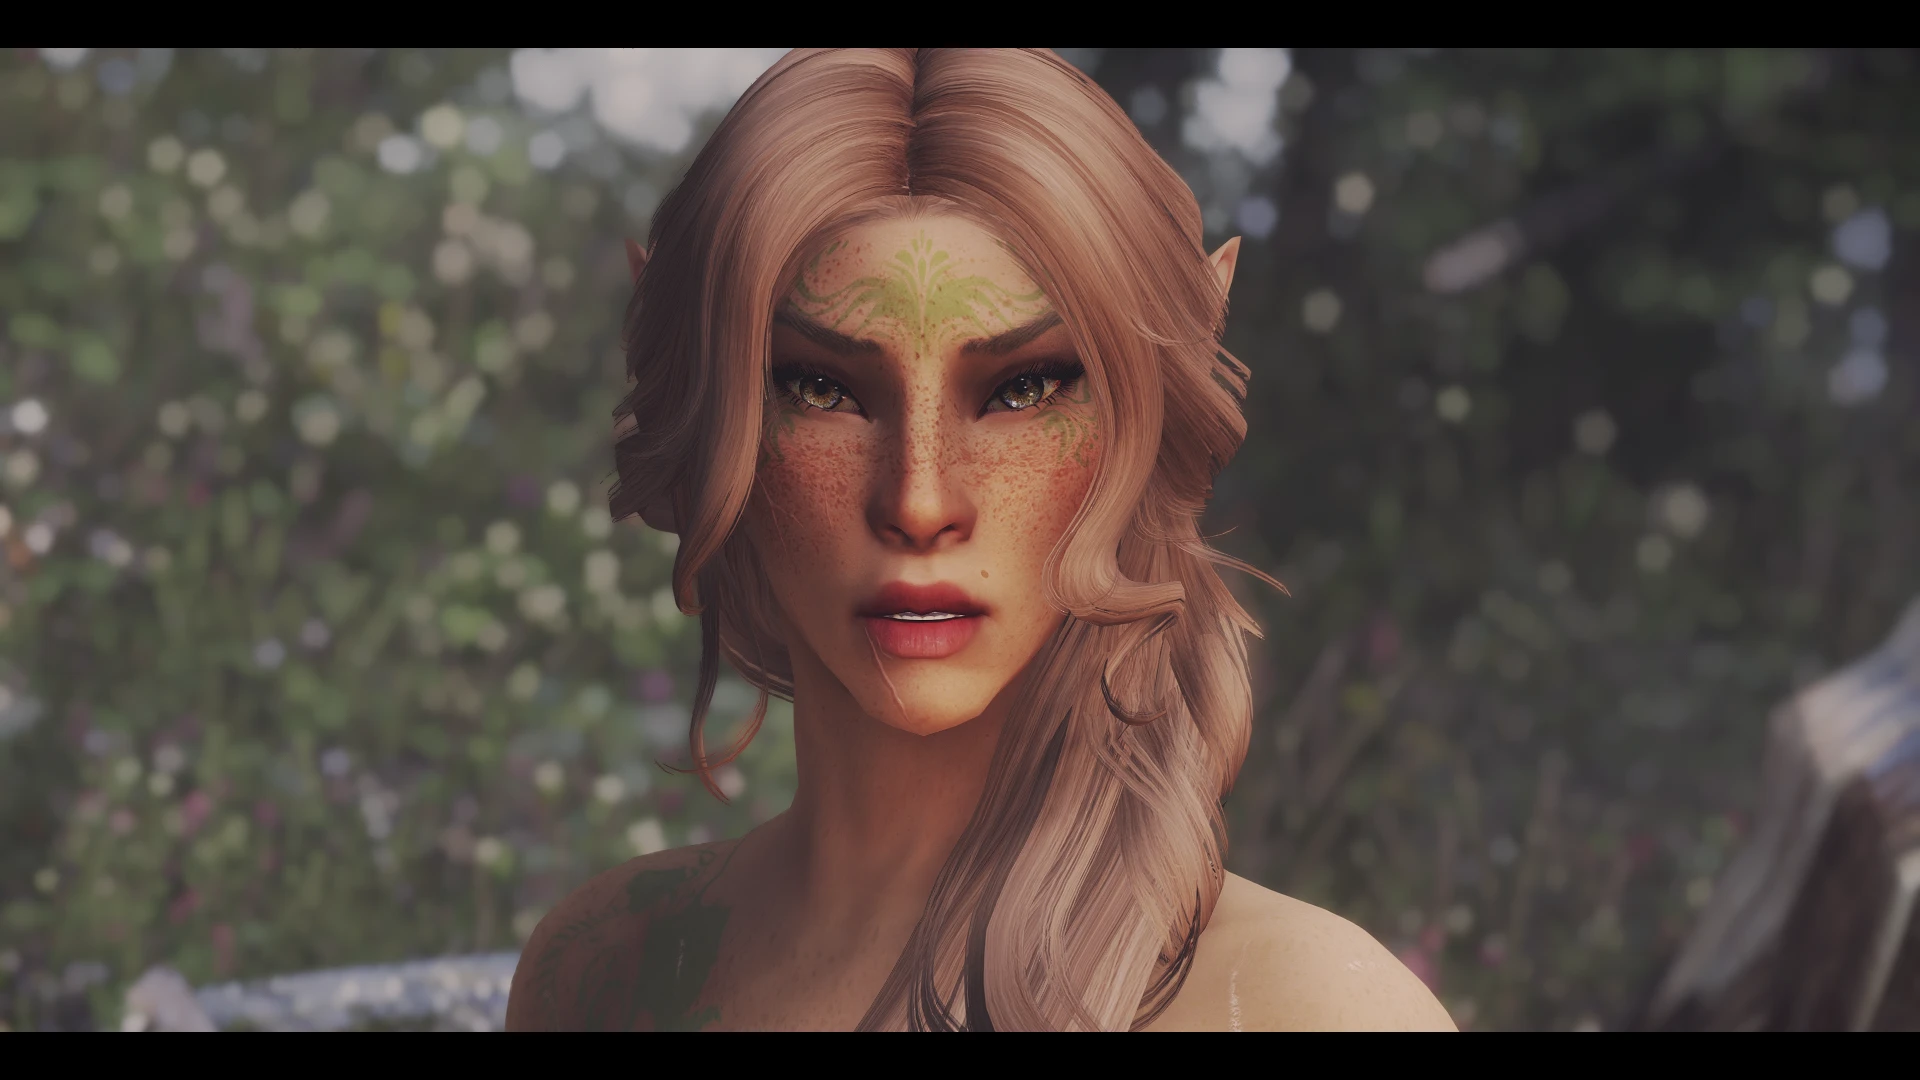 Down to the final four - Bosmer preset WIP.